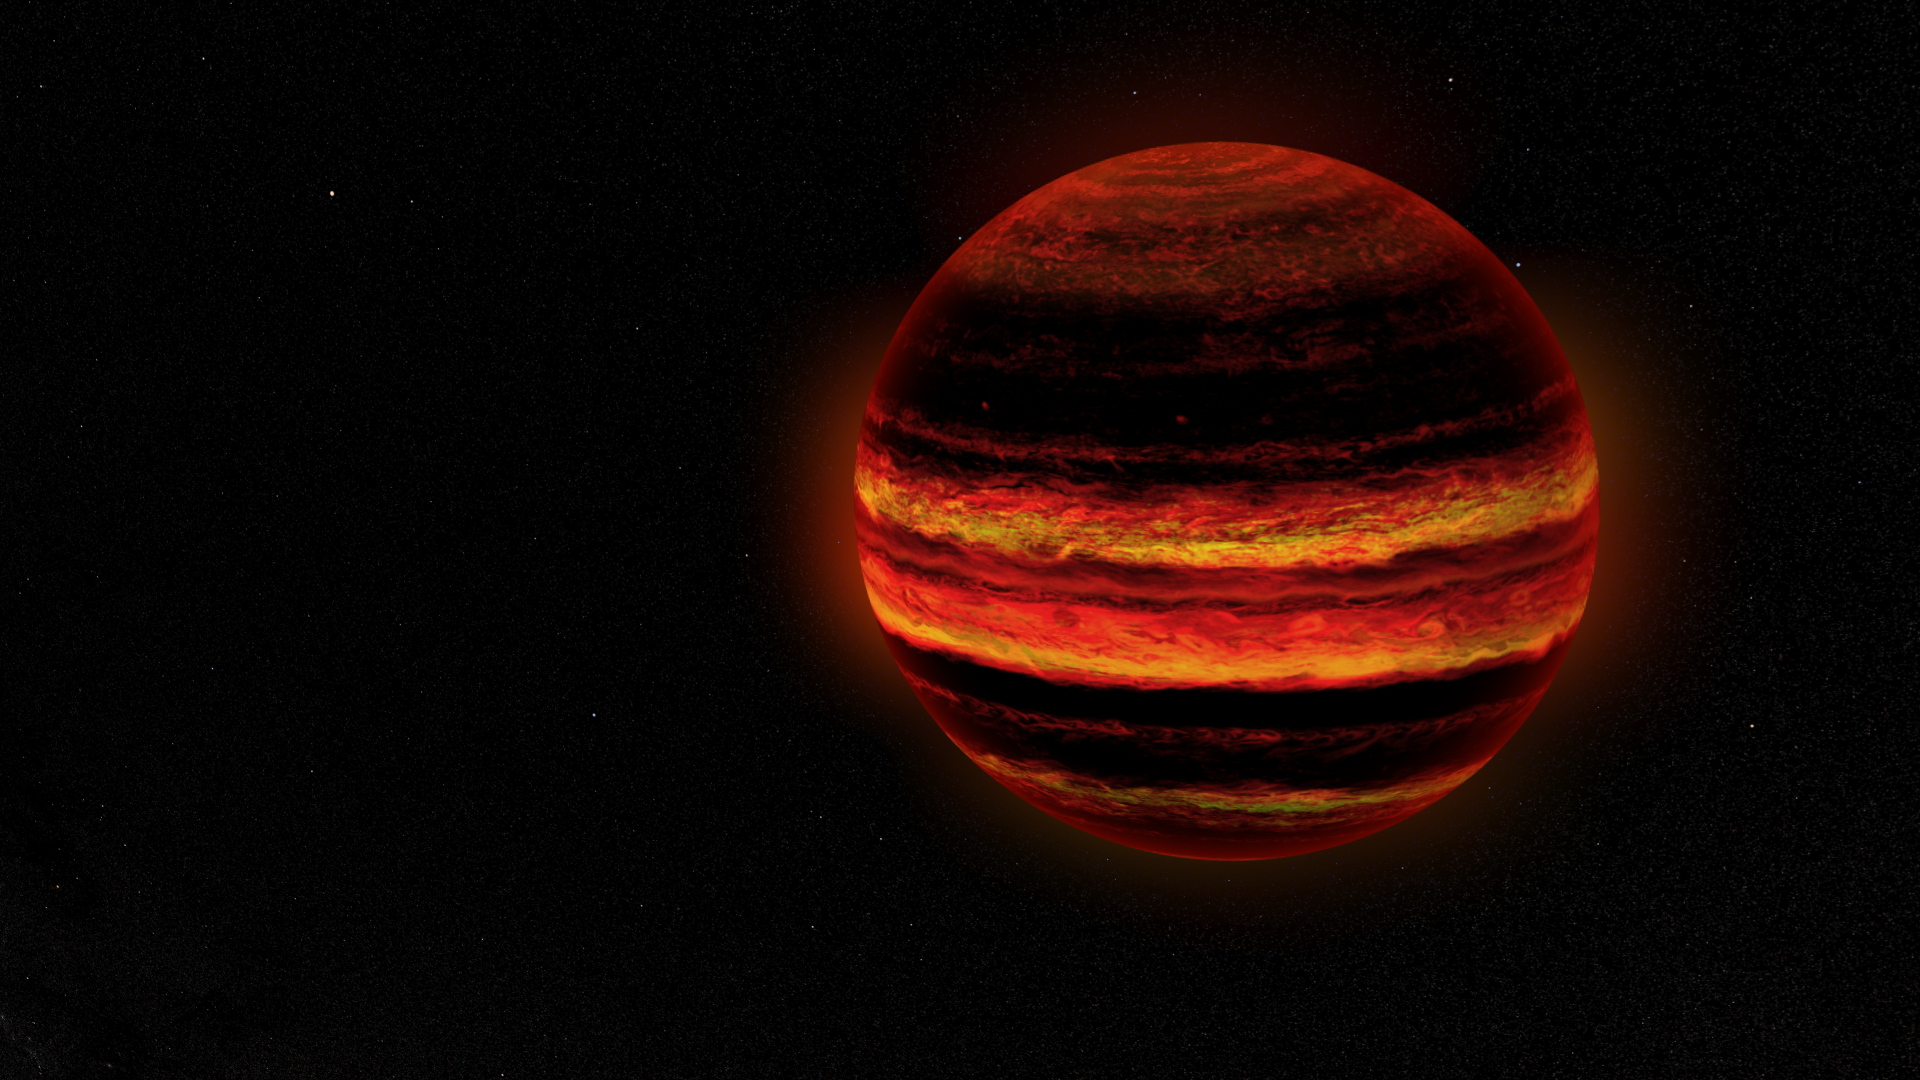 Illustration depicting a brown dwarf, which range from about 4,000 to 25,000 times Earth’s mass. They’re too heavy to be characterized as planets, but not quite massive enough to undergo nuclear fusion in their cores like stars. Watch this video on the NASA.gov Video YouTube channel.